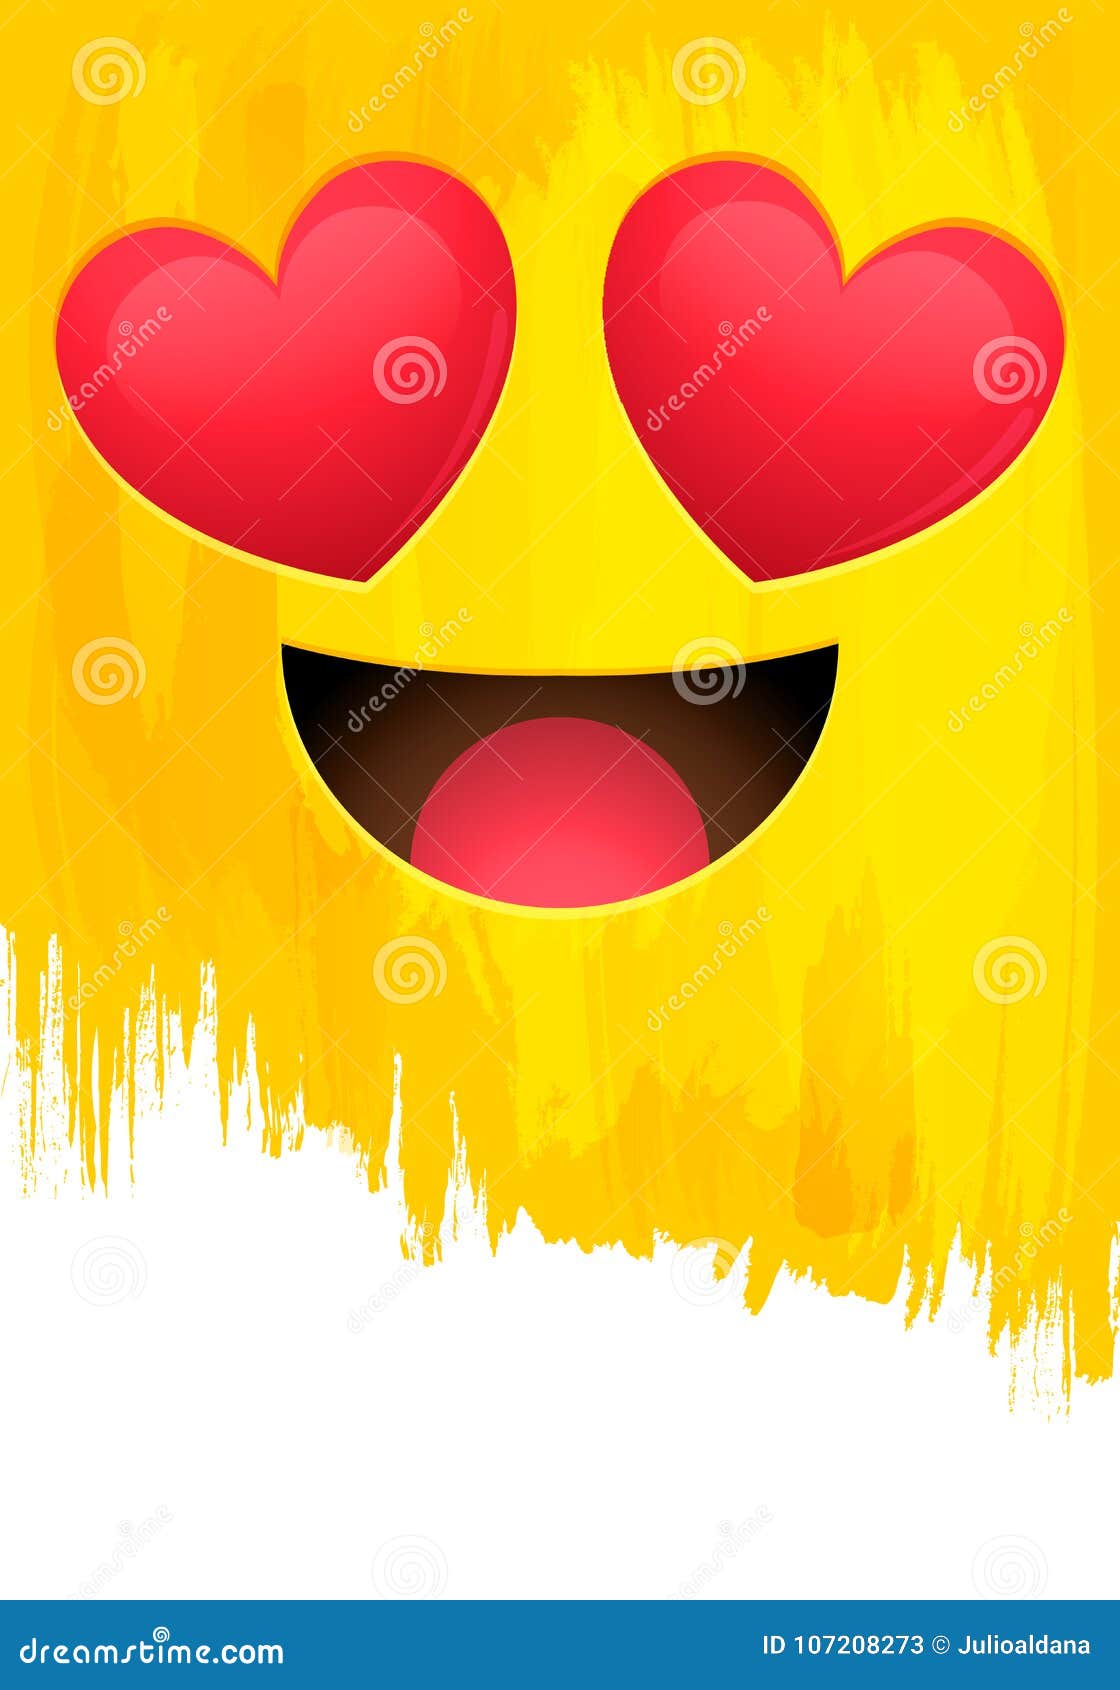 In Love Smiley Face on Yellow Paint Wall Stock Vector ...